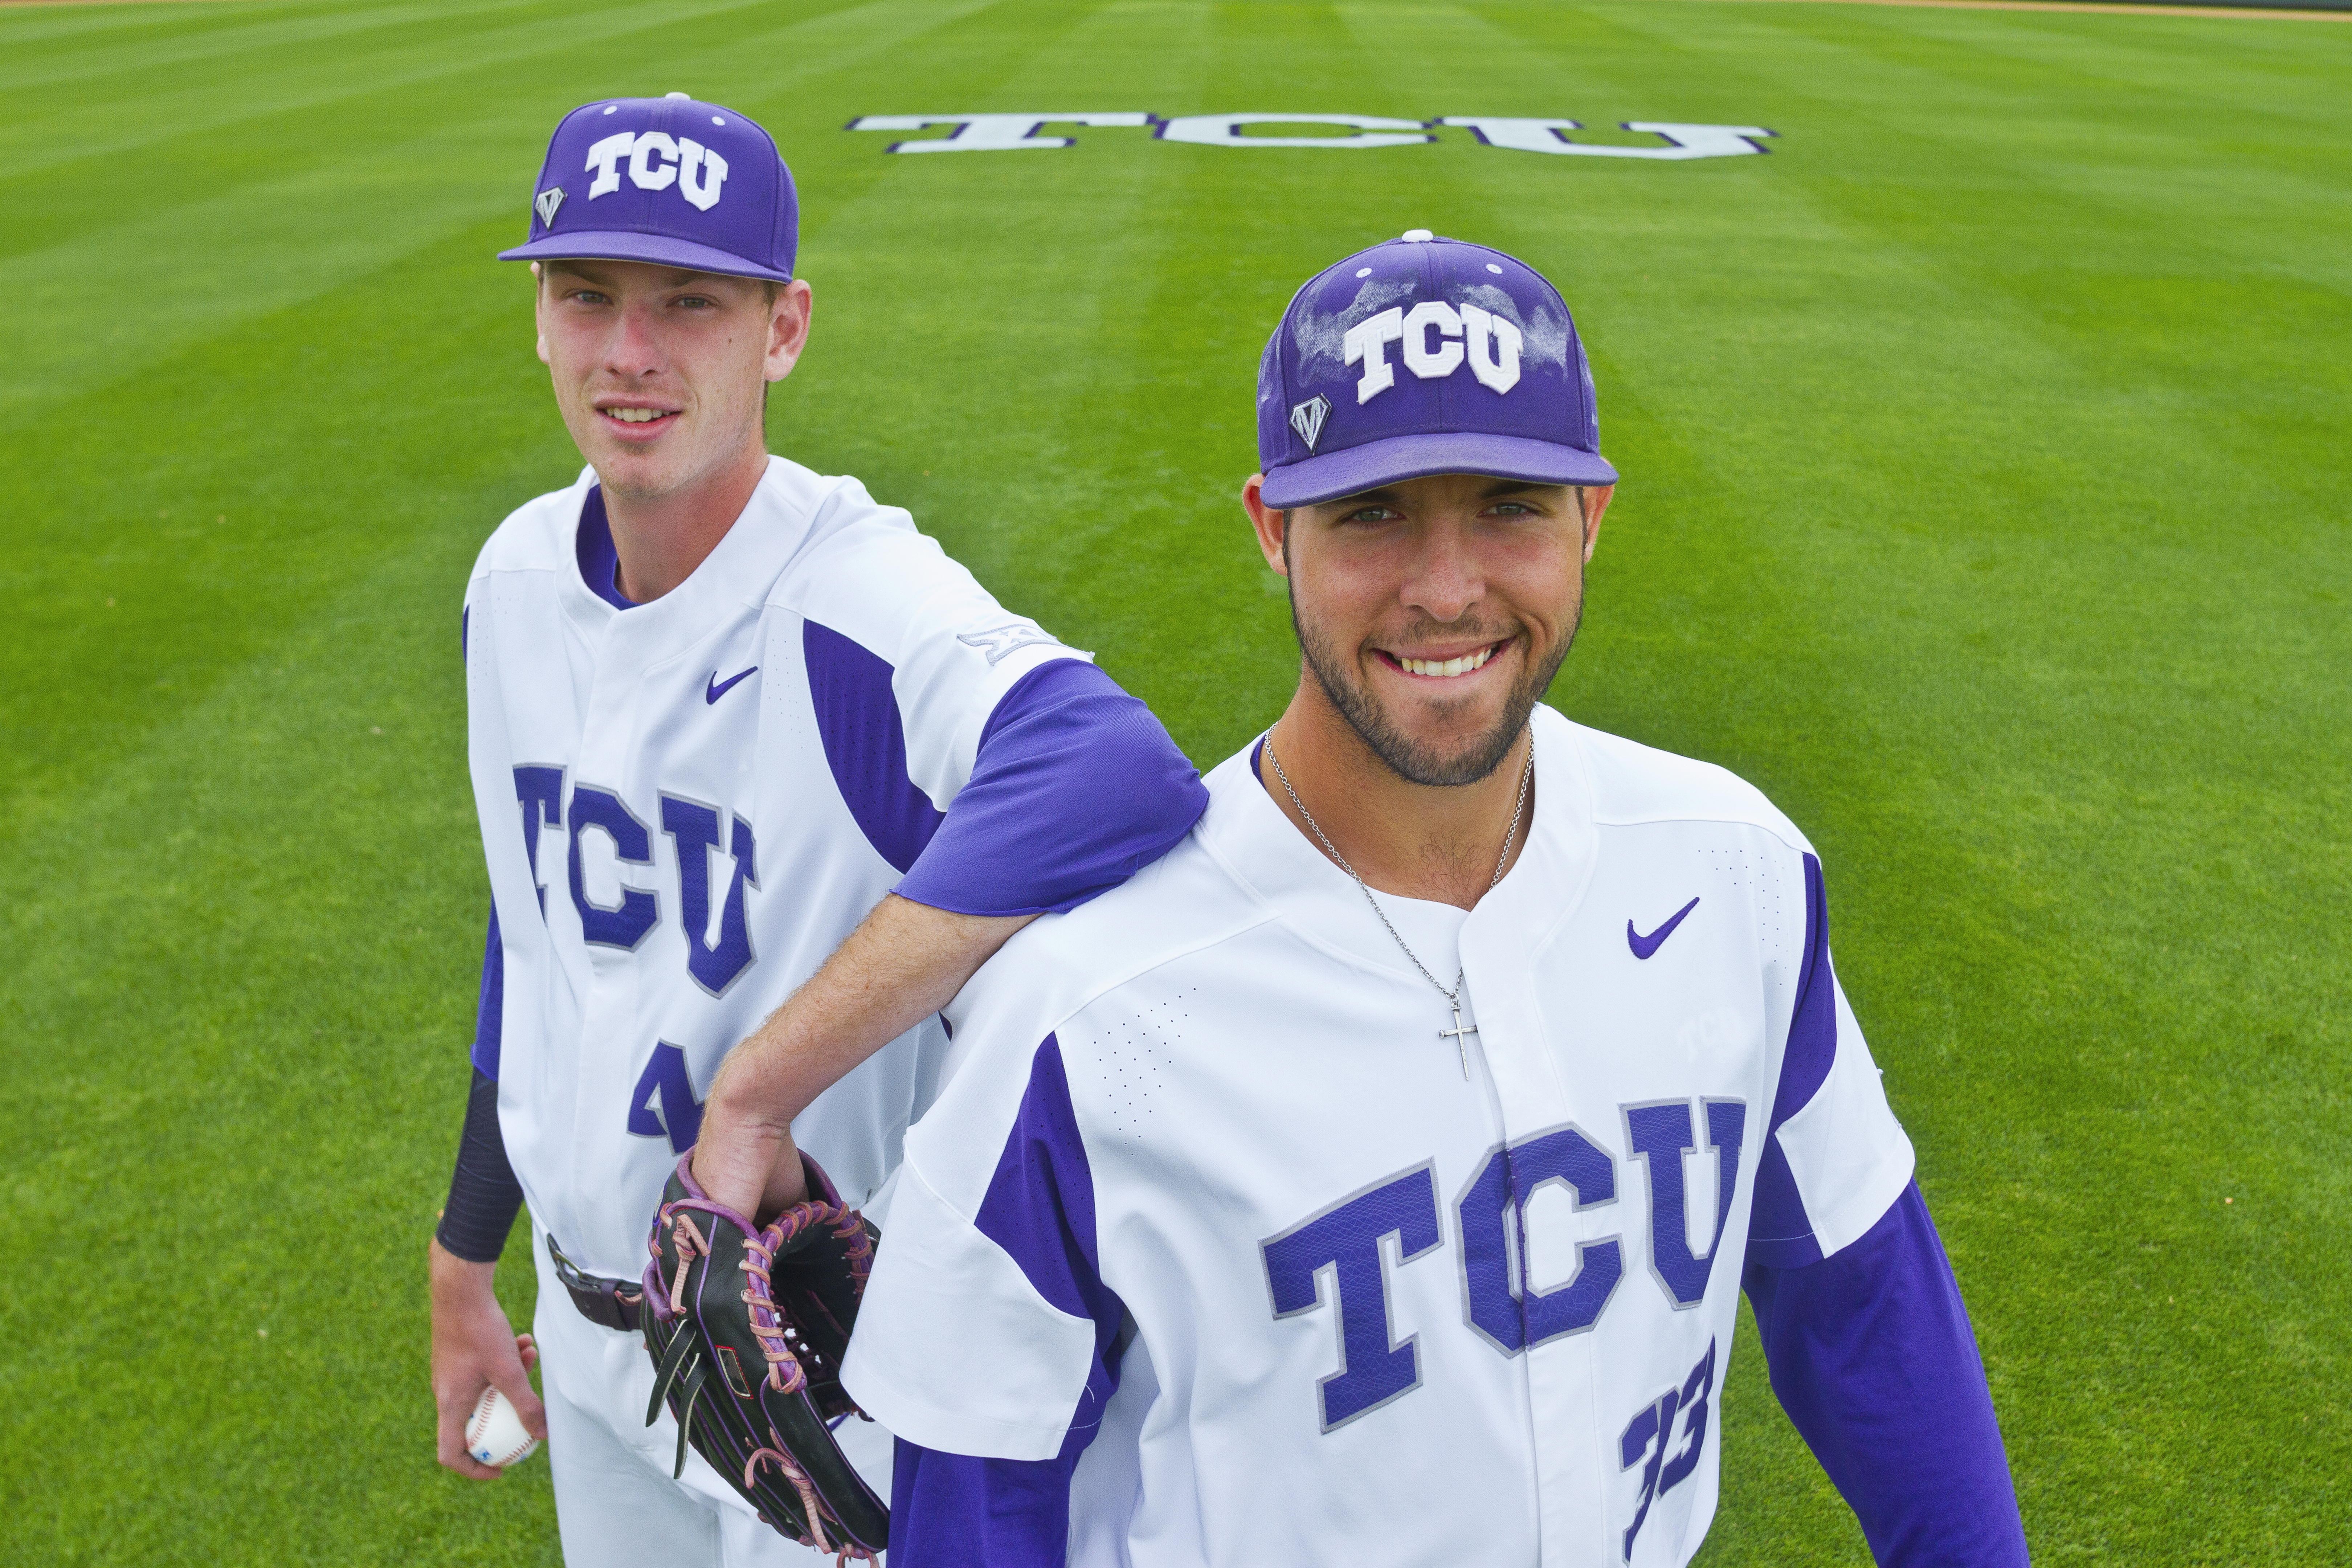 TCU Horned Frogs senior pitchers Brian Howard and Mitchell Traver